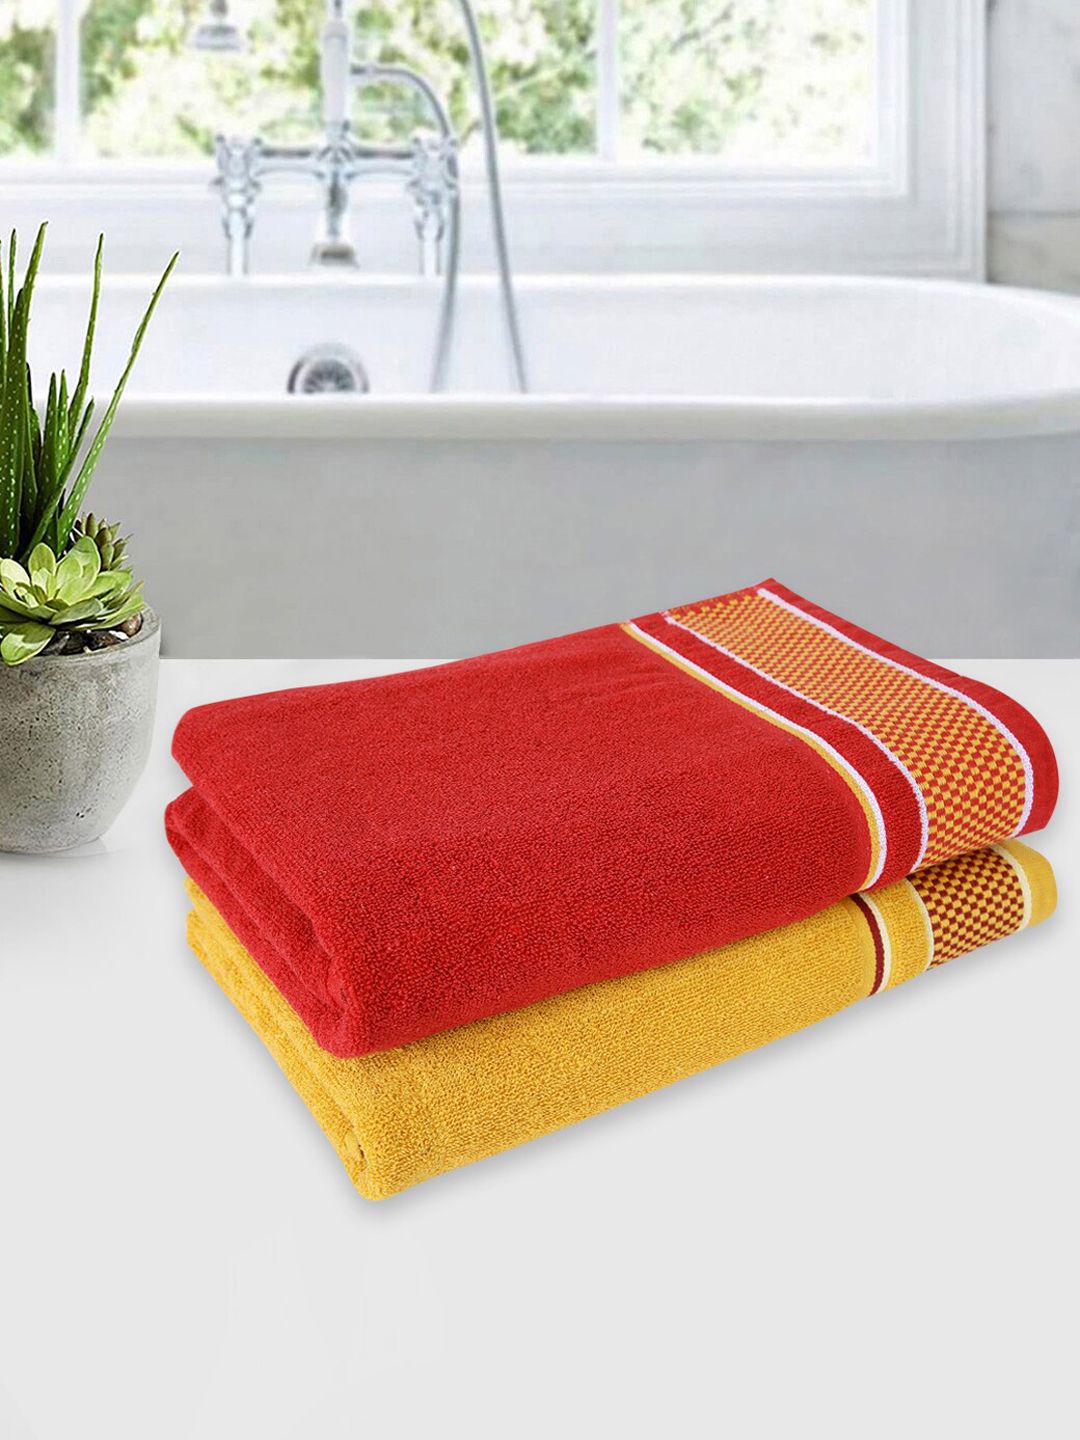 ROMEE Set Of 2 Yellow & Red Solid 500 GSM Cotton Bath Towels Price in India